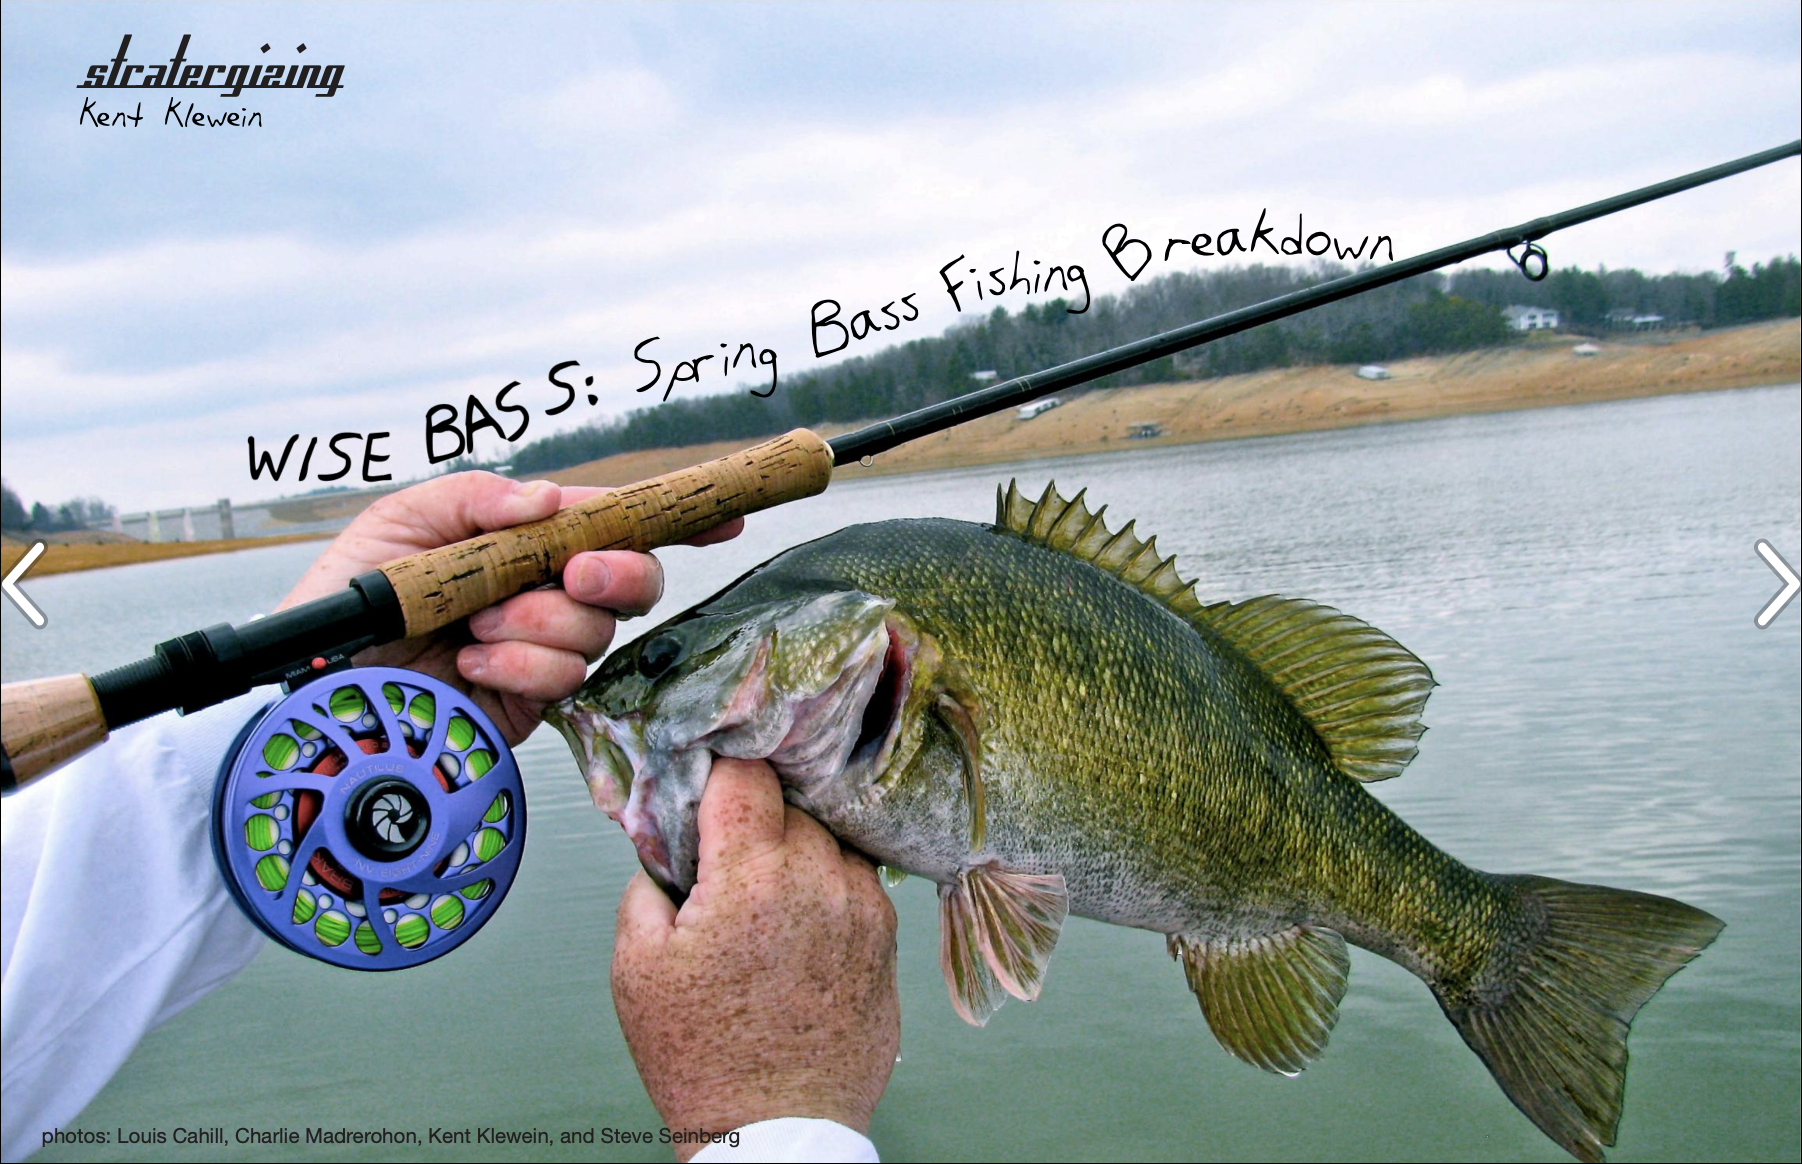 WISE BASS: Spring Bass Fishing Breakdown, Part 1